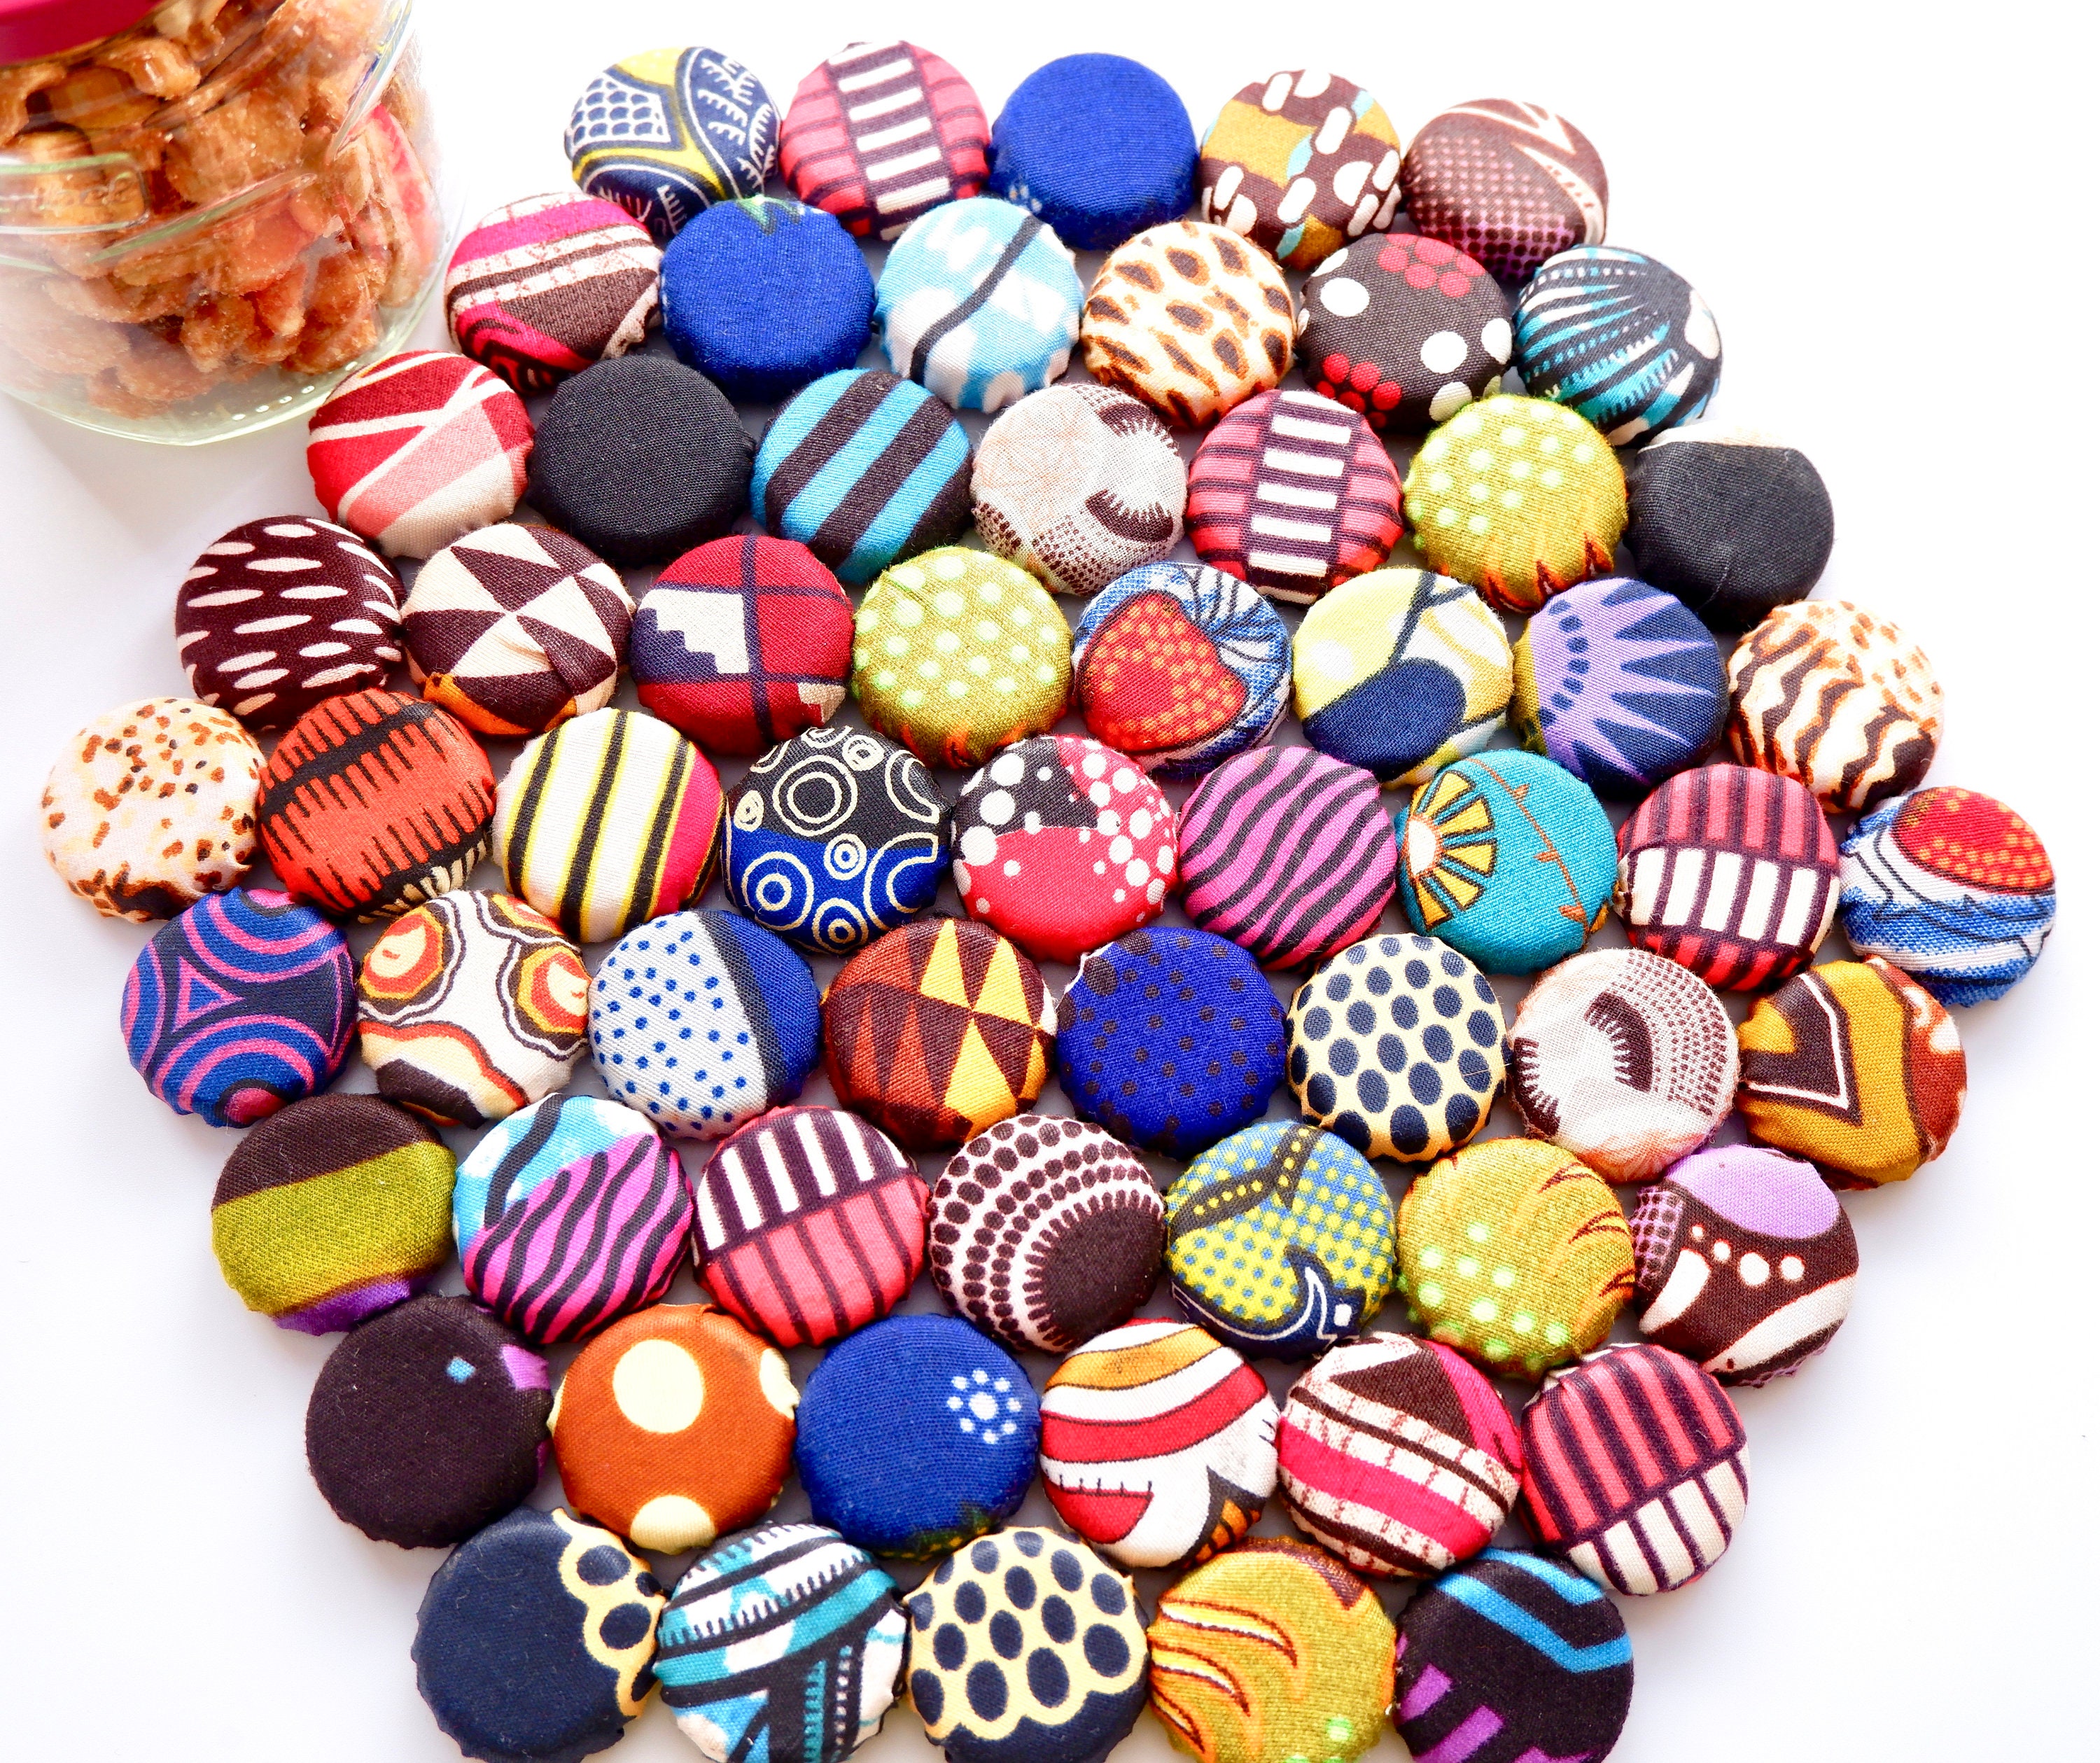 Bottle Top Trivet Mat Hot Pad: Multi Purpose Pot Holder, Heat Resistant Pot  Holder Pad for Hot Dishes and Table-kitchen Pot Holders . 